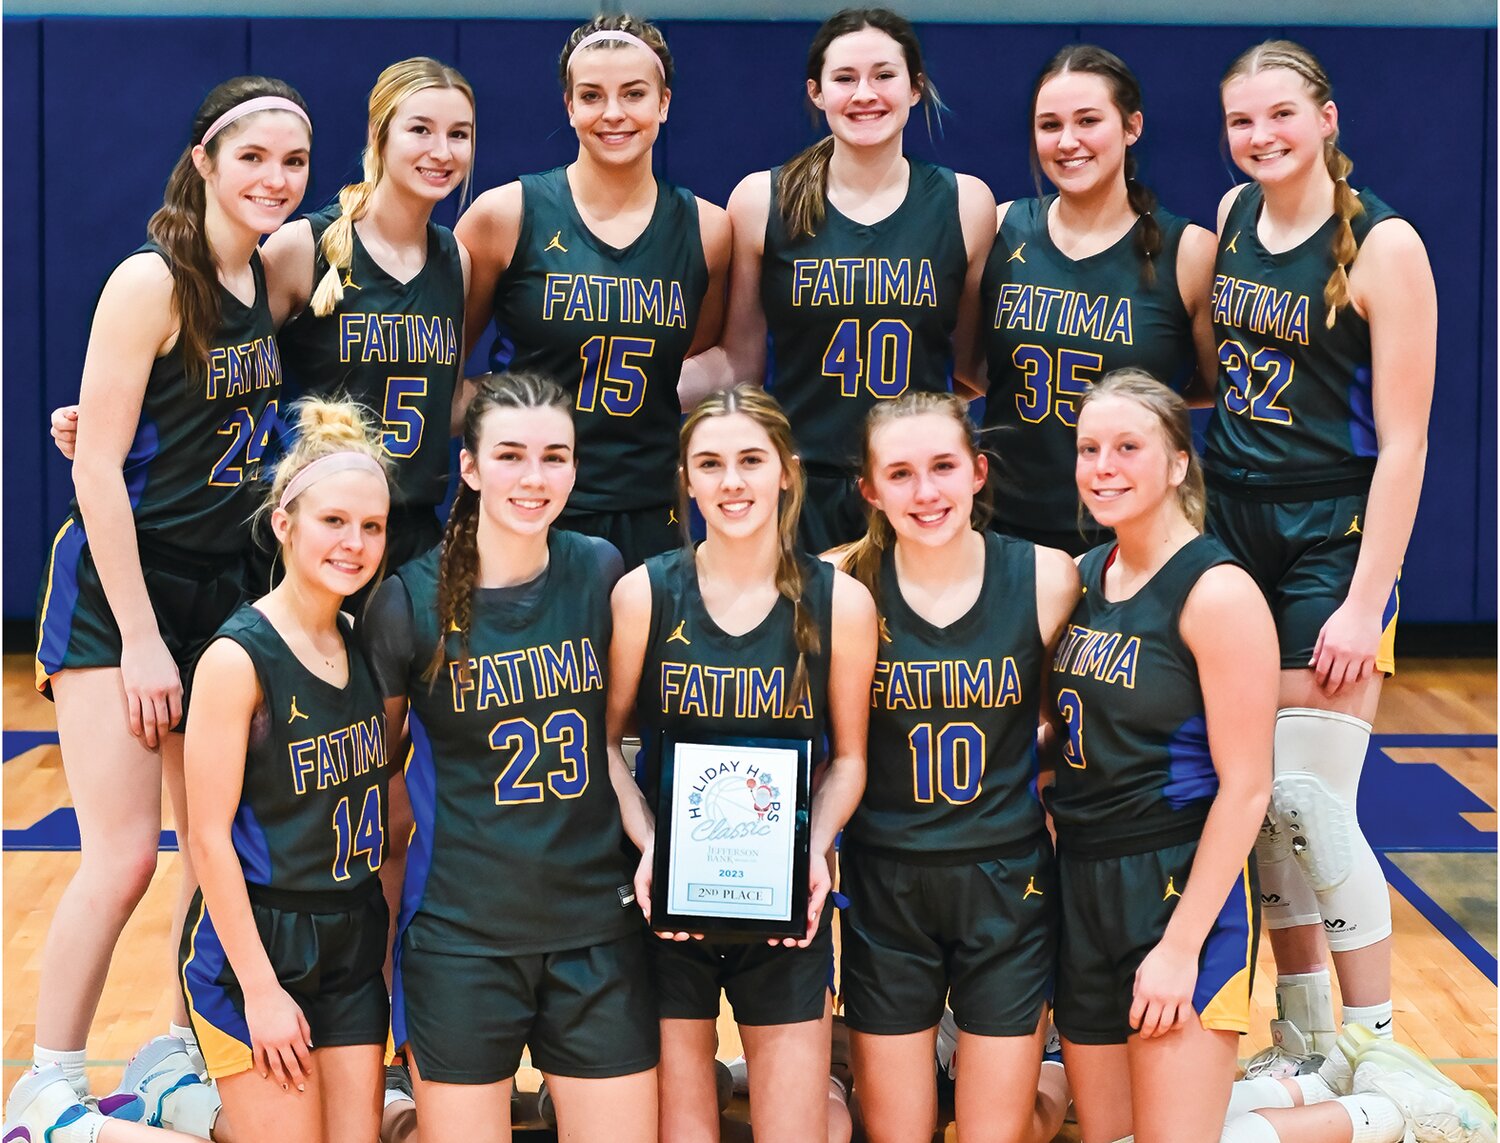 Fatima earned second place at last week’s Jefferson Bank Classic in Jefferson City. Team members are, from left to right, front row, Kaitlyn Plassmeyer, Vivian Bax, Natalie Wilbers, Alex Berhorst, and Kristen Robertson; and in the back row, Lucy Crede, Elise Dickneite, Alli Robertson, Adalyn Berhorst, Payton Wieberg, and Madelyn Backes.